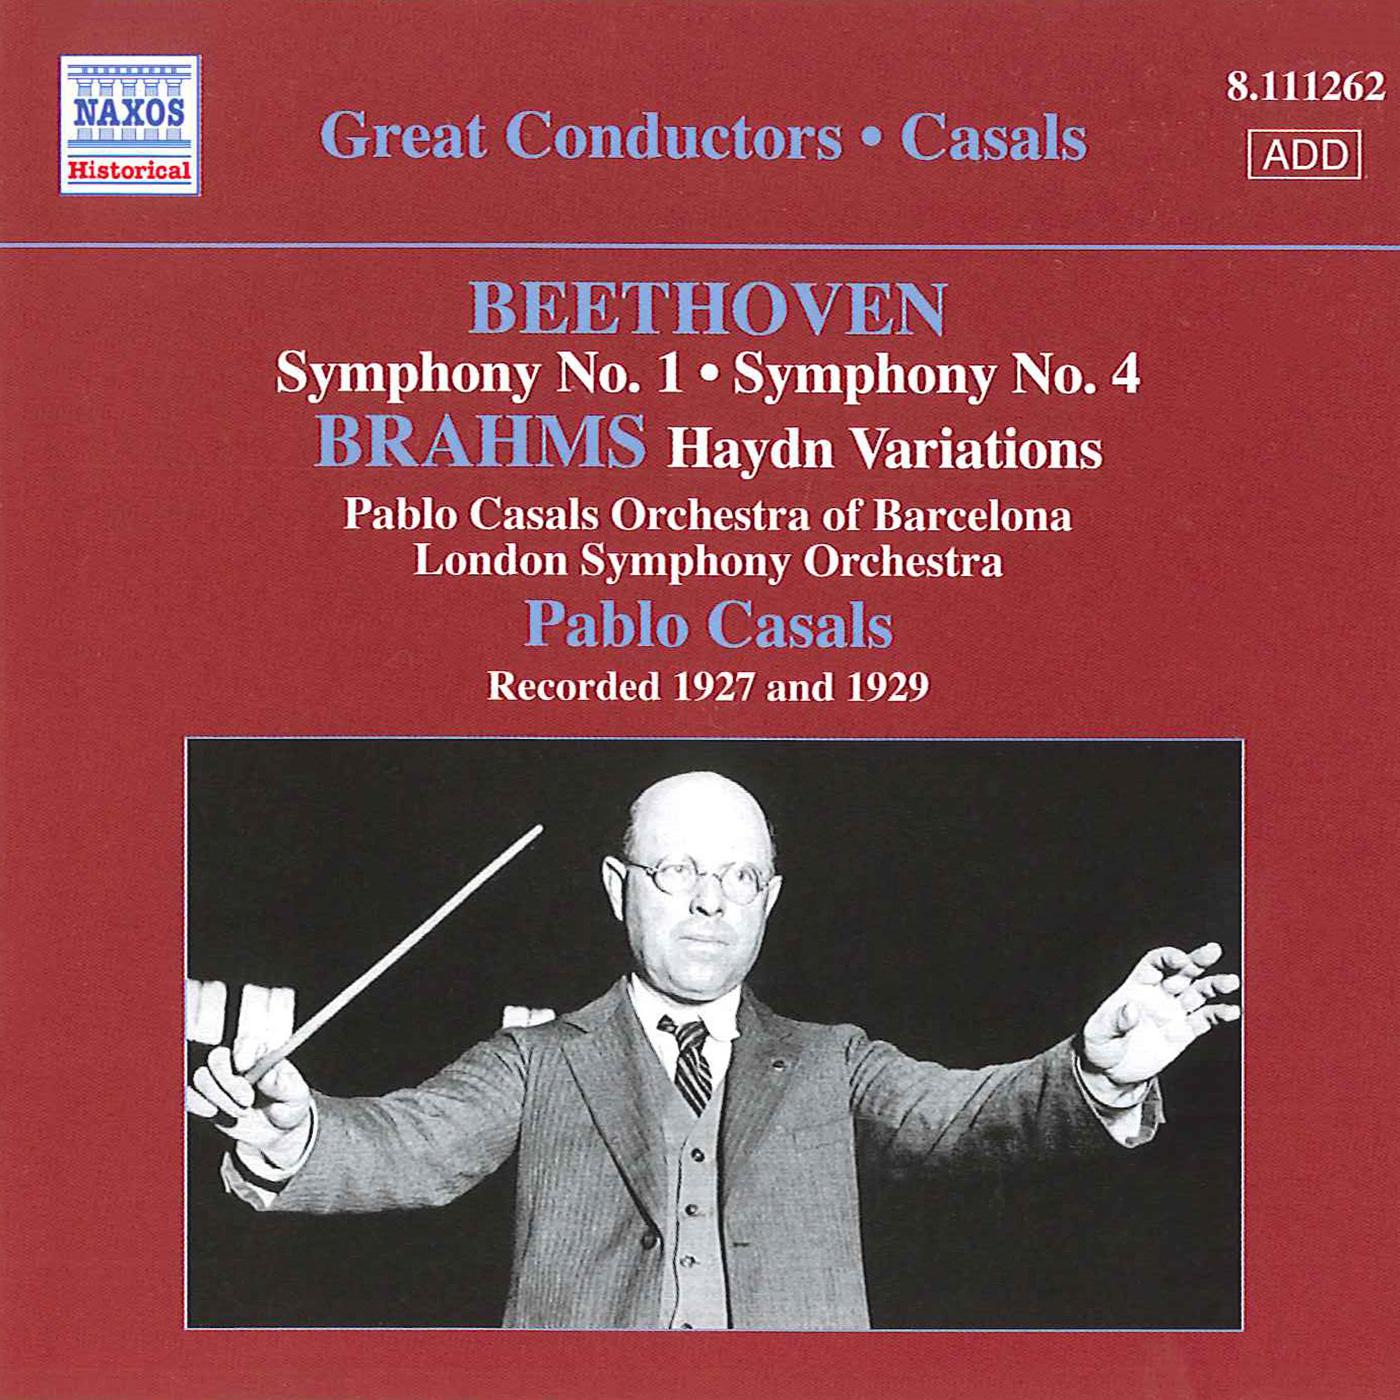 Variations on a Theme by Haydn, Op. 56a, "St. Anthony Variations": Variation 6: Vivace